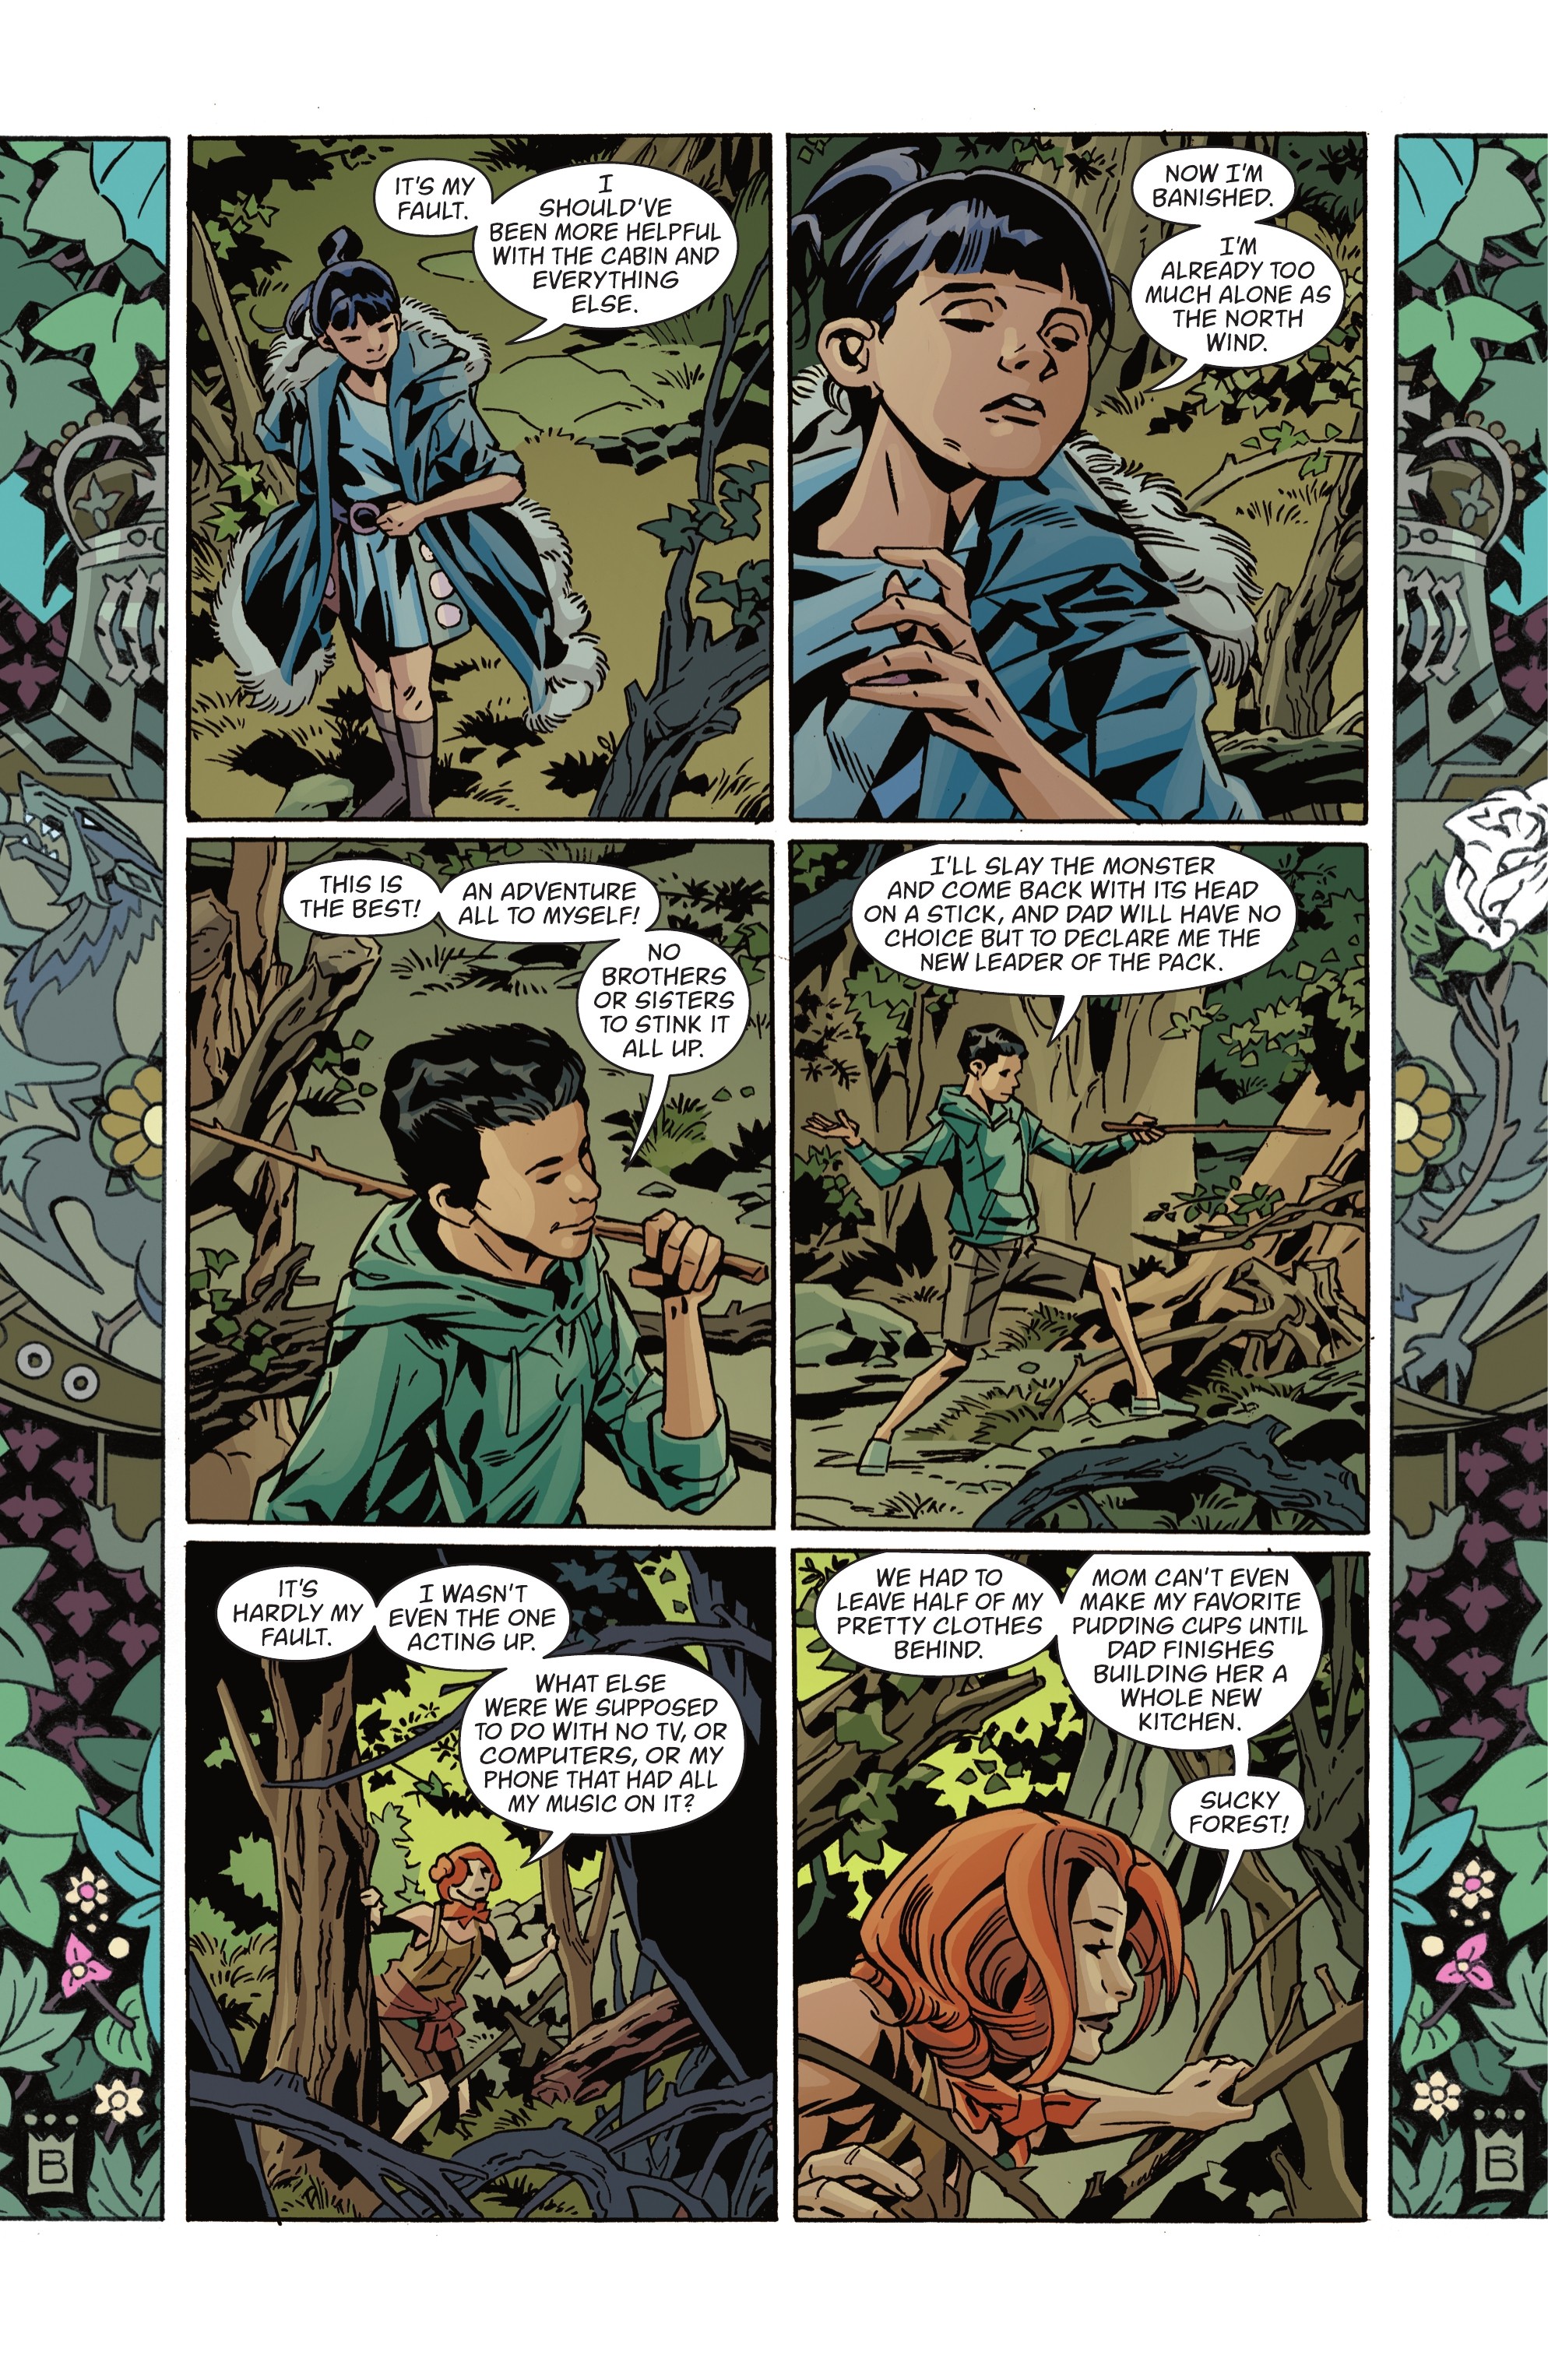 Fables (2002-): Chapter 153 - Page 4